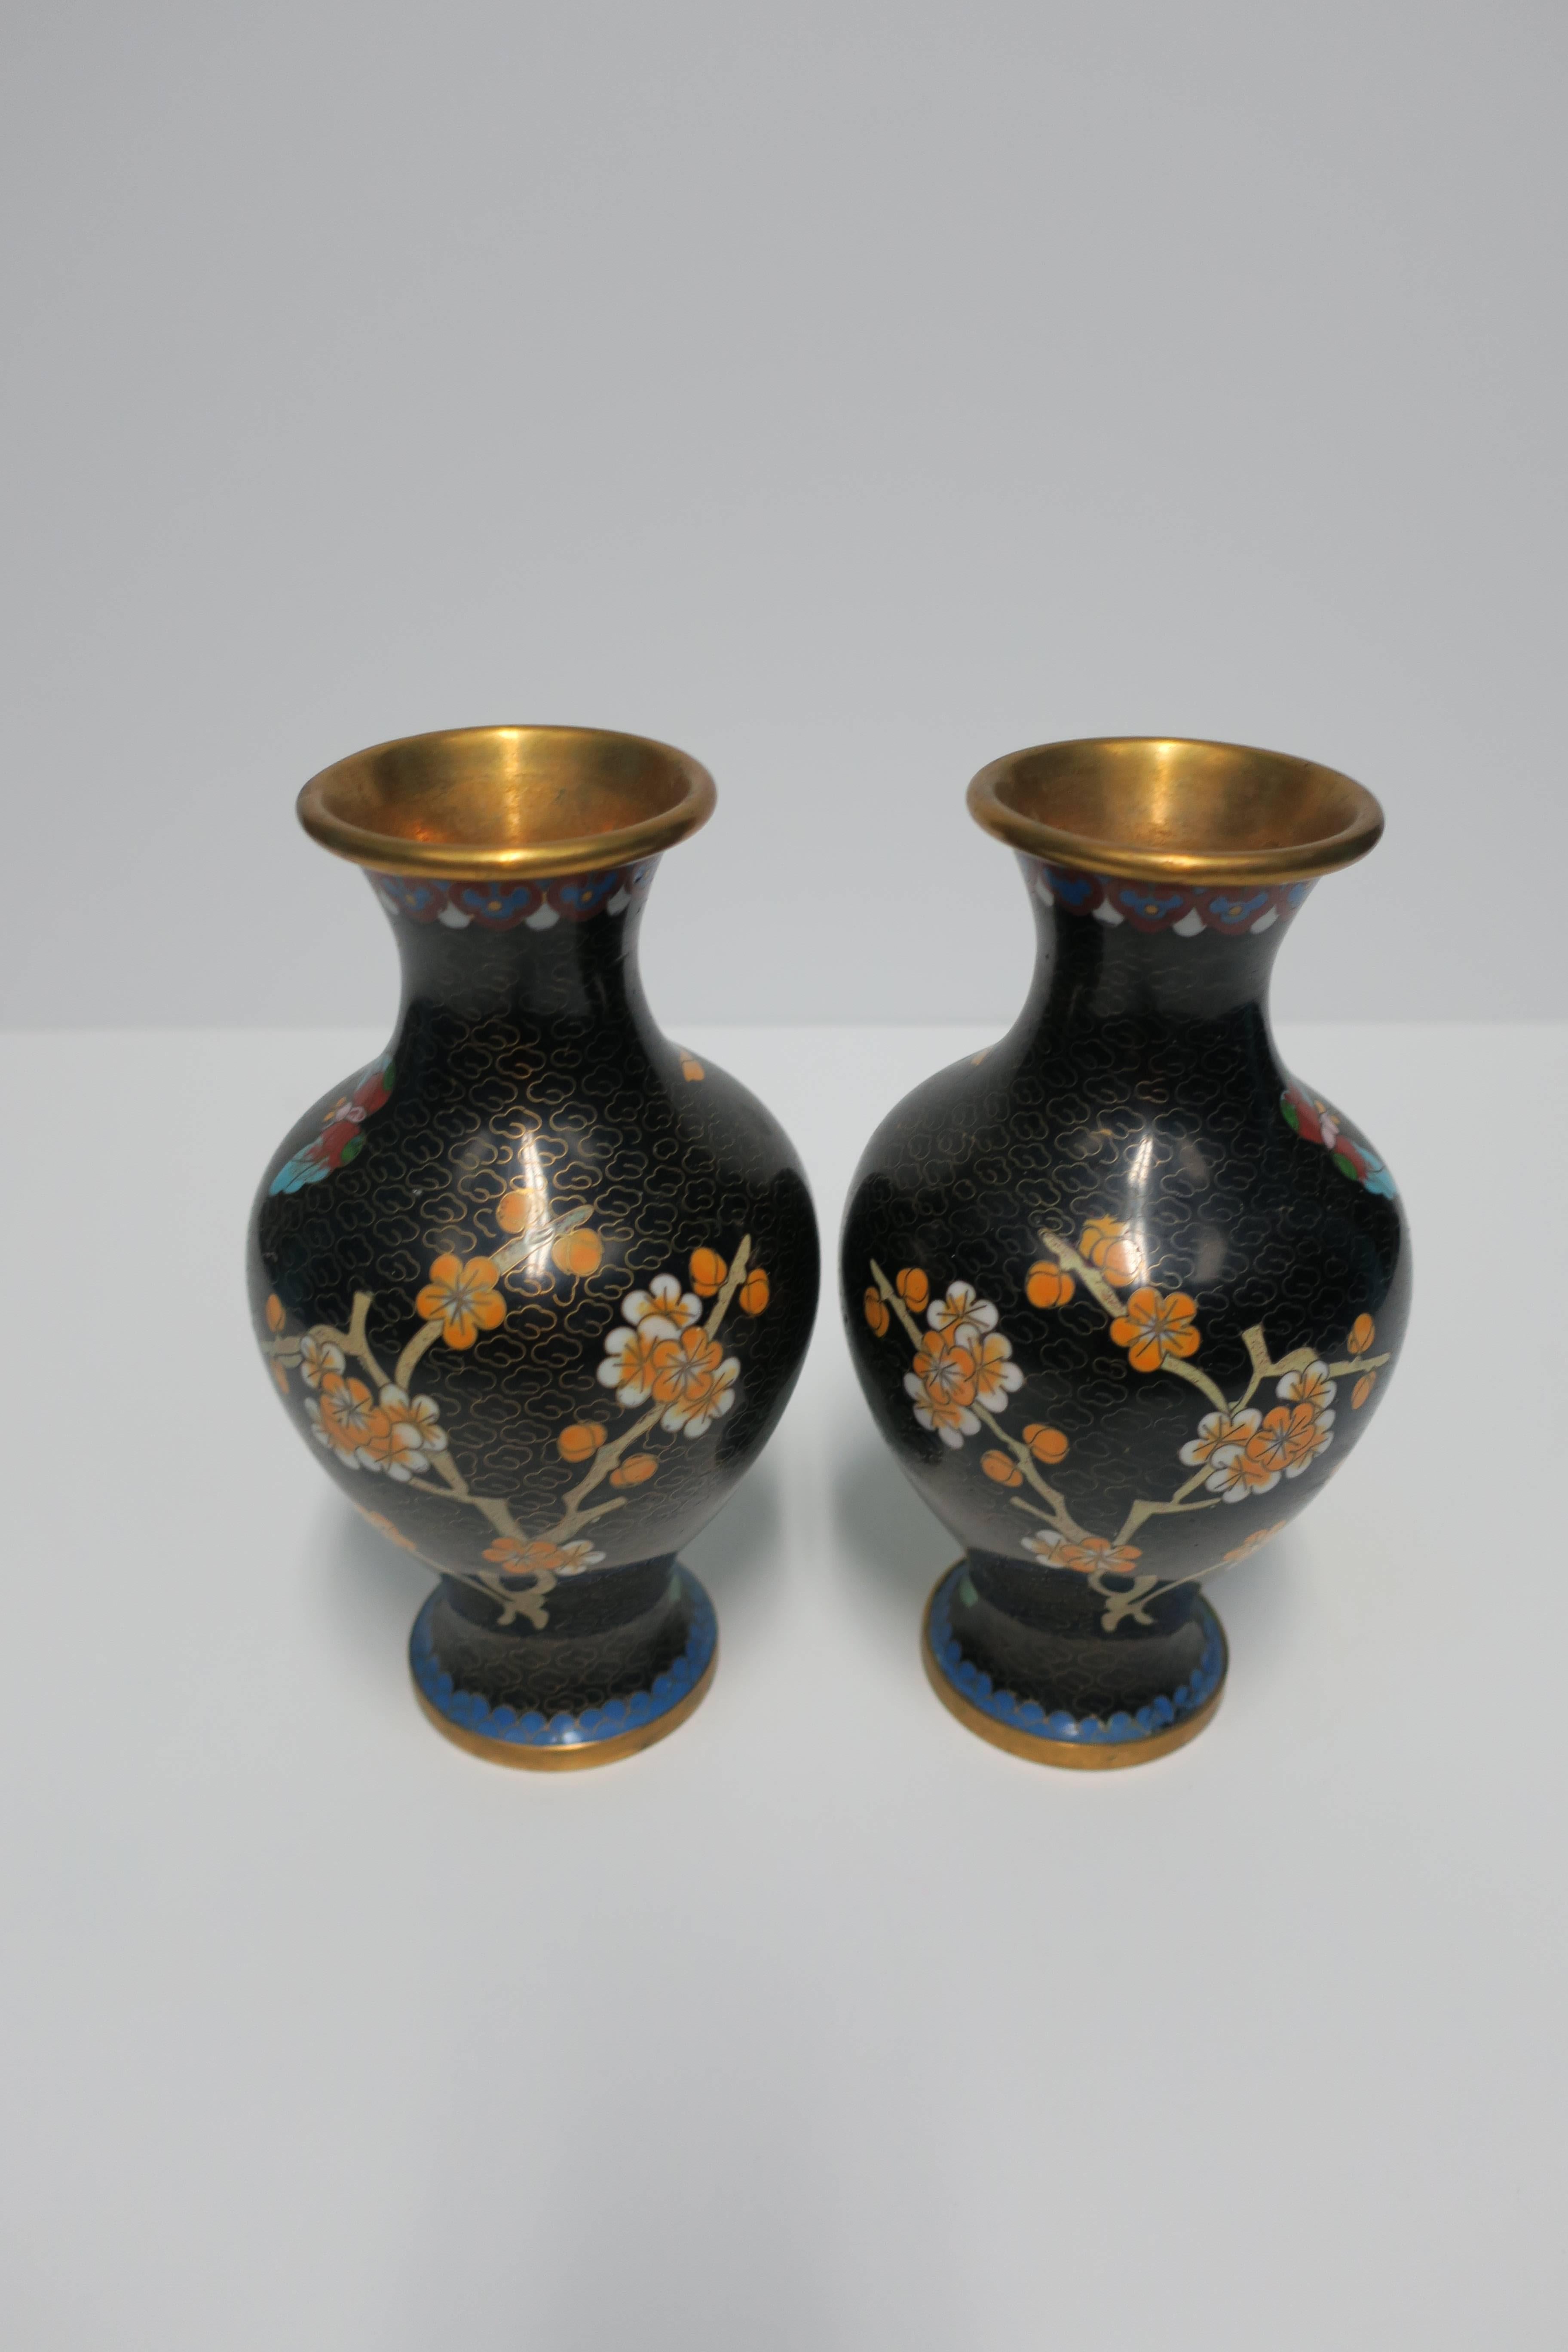 Black and Green Cloisonné́ Enamel and Brass Flower Vases, Pair For Sale 4